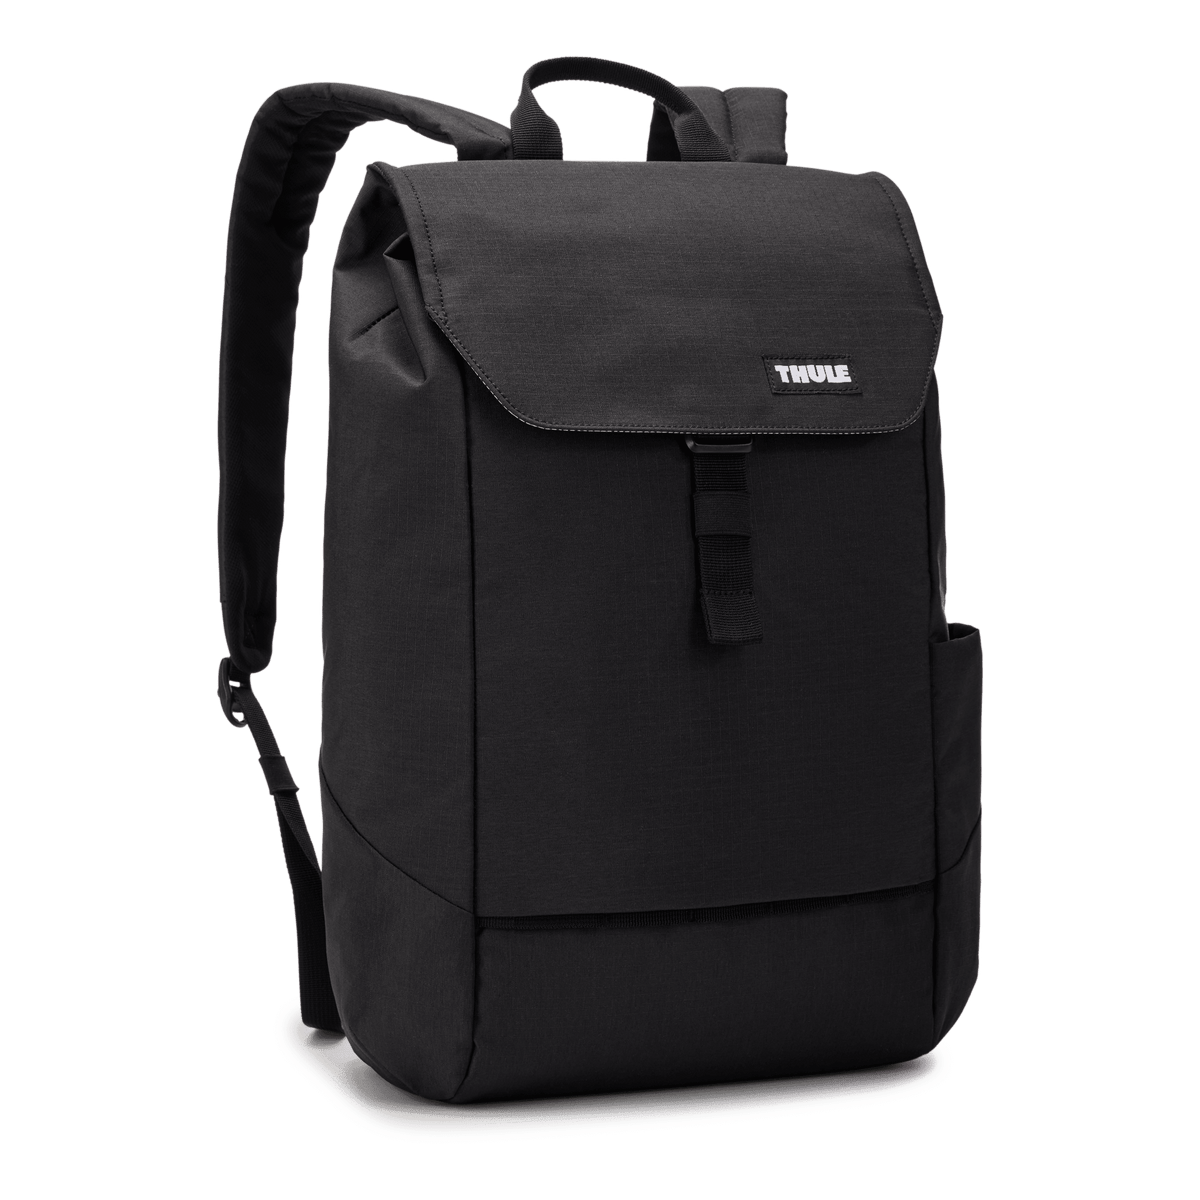 Lithos Backpack 16L | Thule - Wake Concept Store  